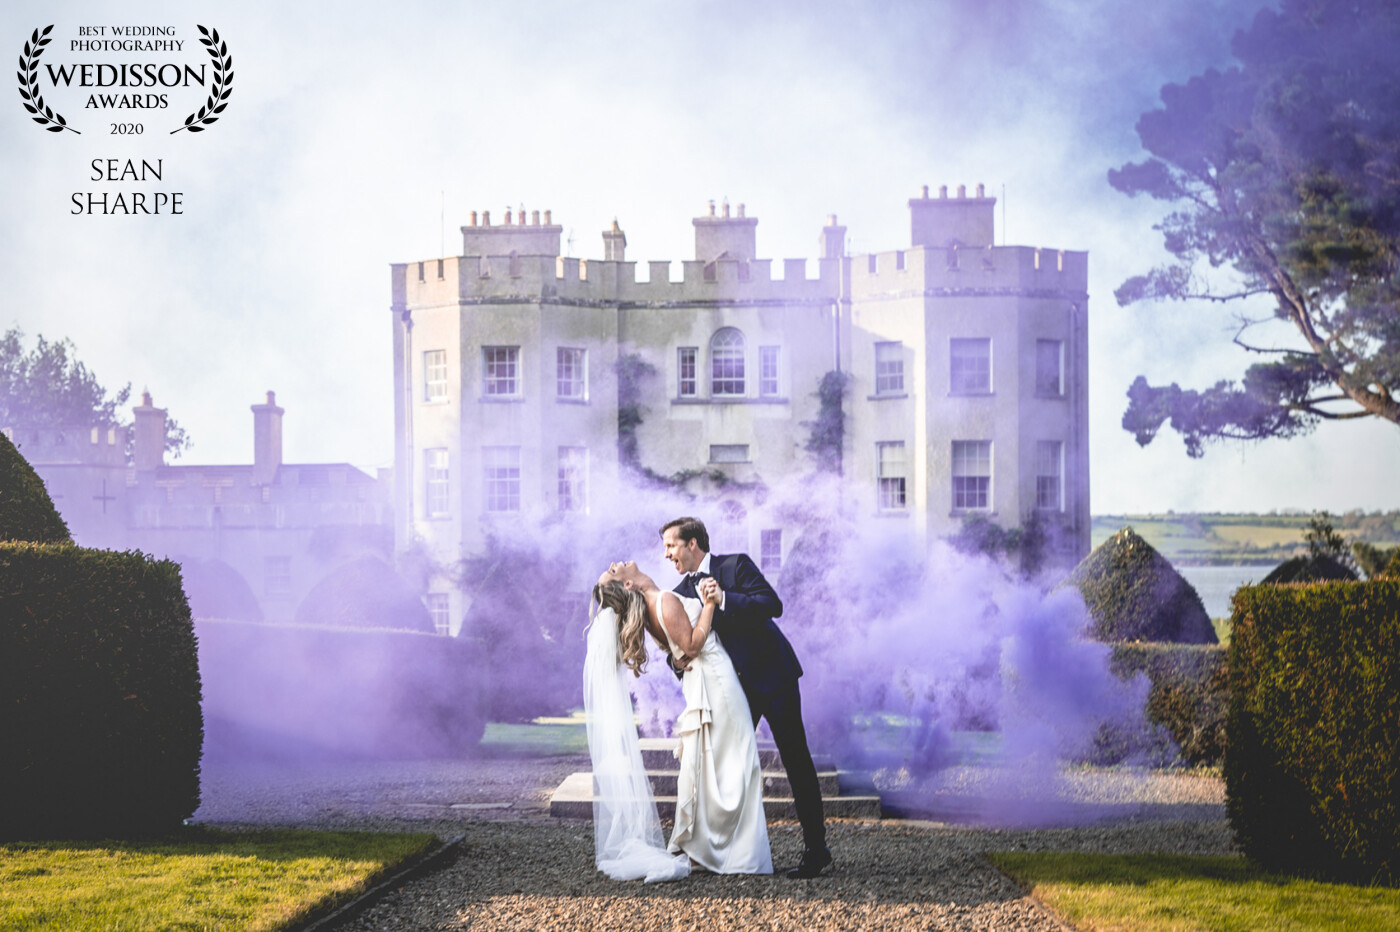 King & Queen of the Castle - taken at the beautiful Glin Castle, Co. Clare, Ireland. Everything about this day was amazing, from the couple to the weather and light. Loved experimenting with these smoke bombs...always adds something different! Would do it all over again!